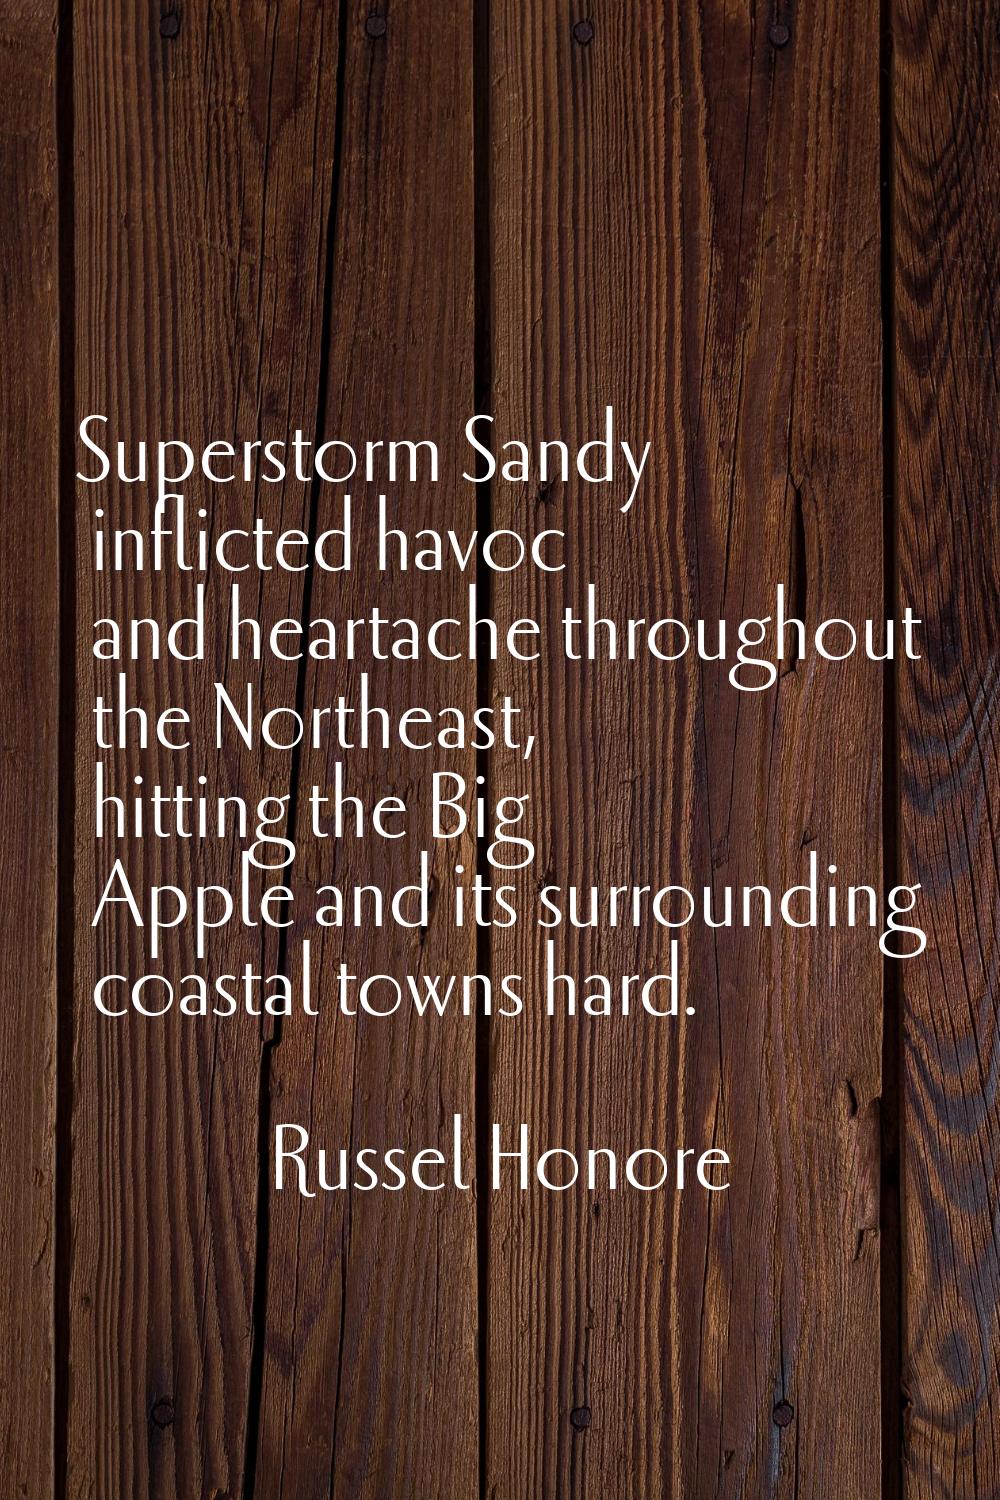 Superstorm Sandy inflicted havoc and heartache throughout the Northeast, hitting the Big Apple and 